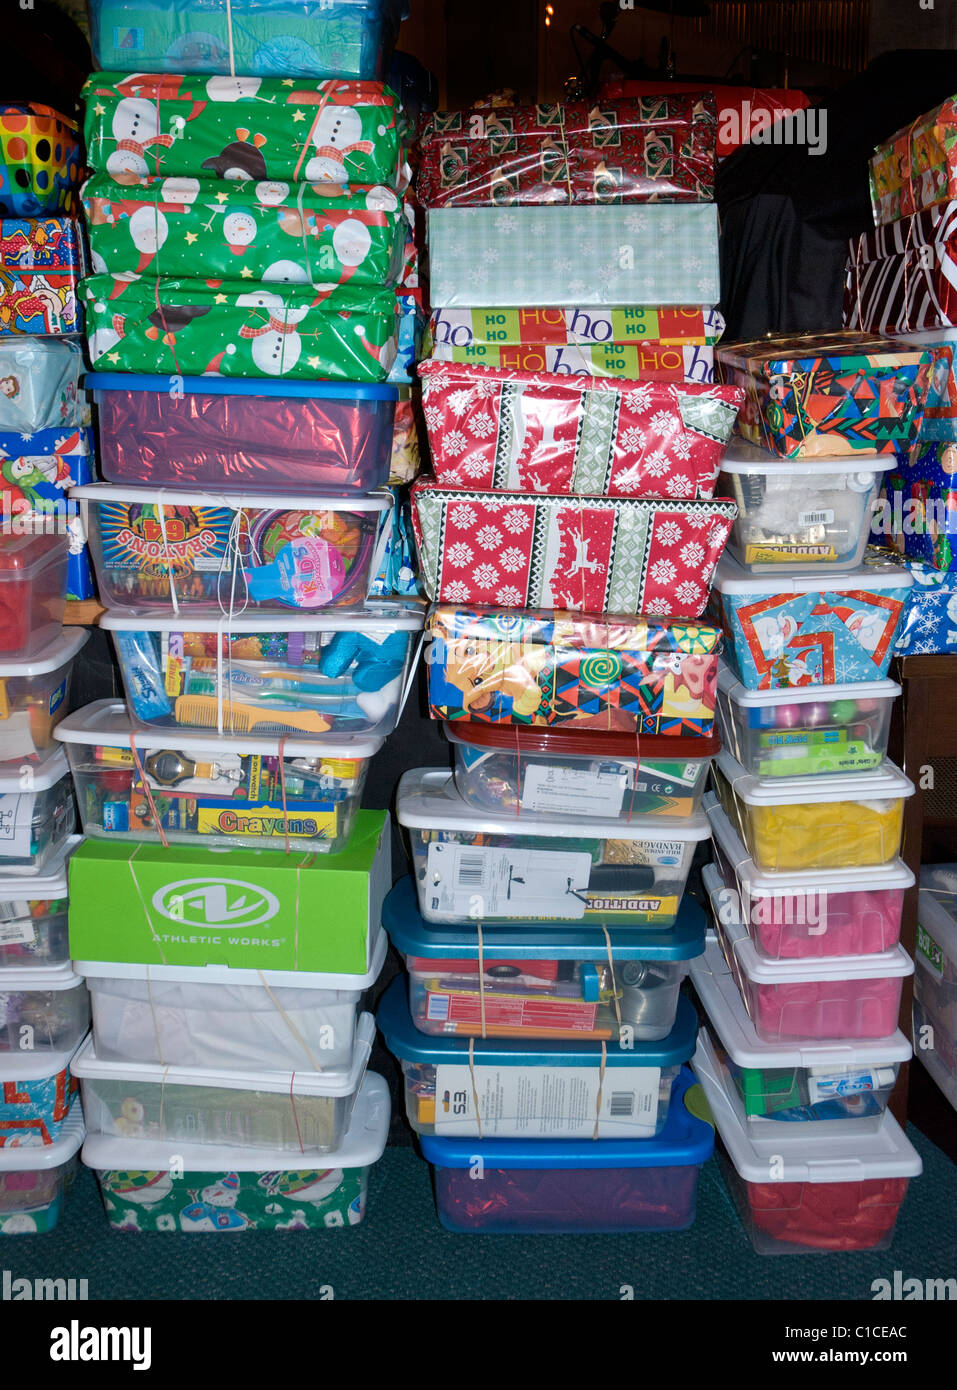 Samaritan's Purse collects shoebox gifts for Operation Christmas Child